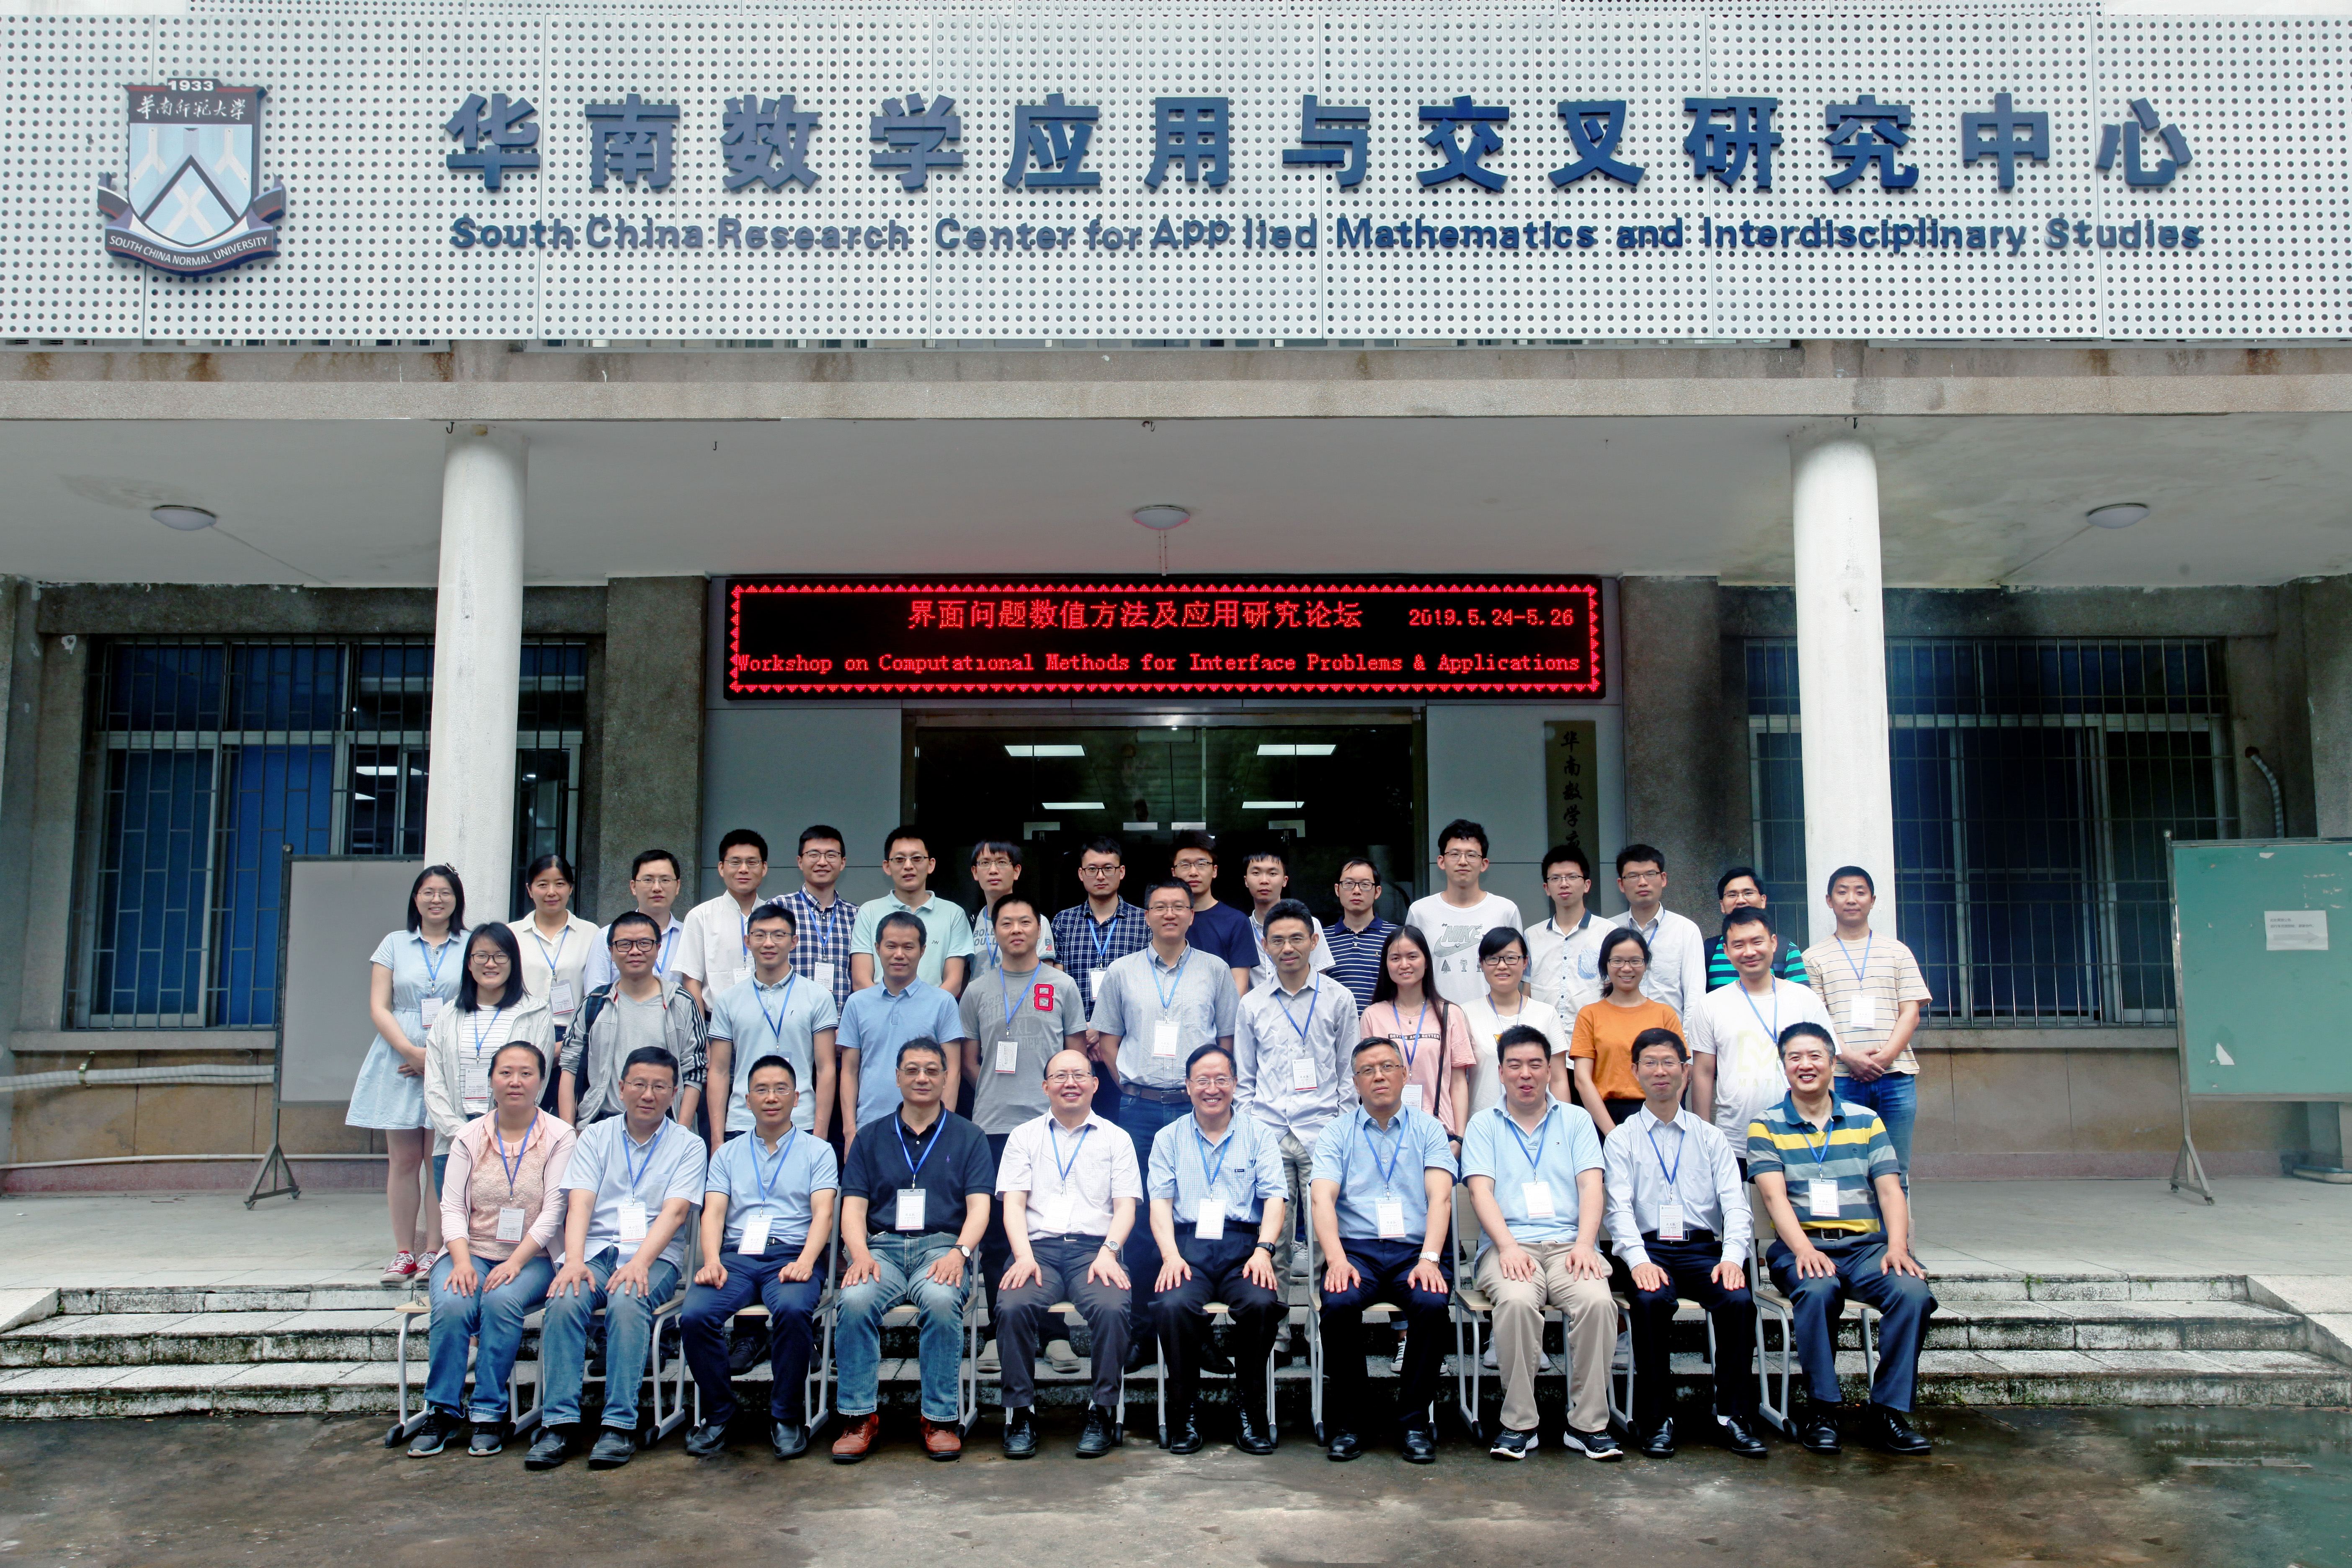 5.25Group photo-Workshop on Computational Methods for Interface Problems & Applications (1).jpg